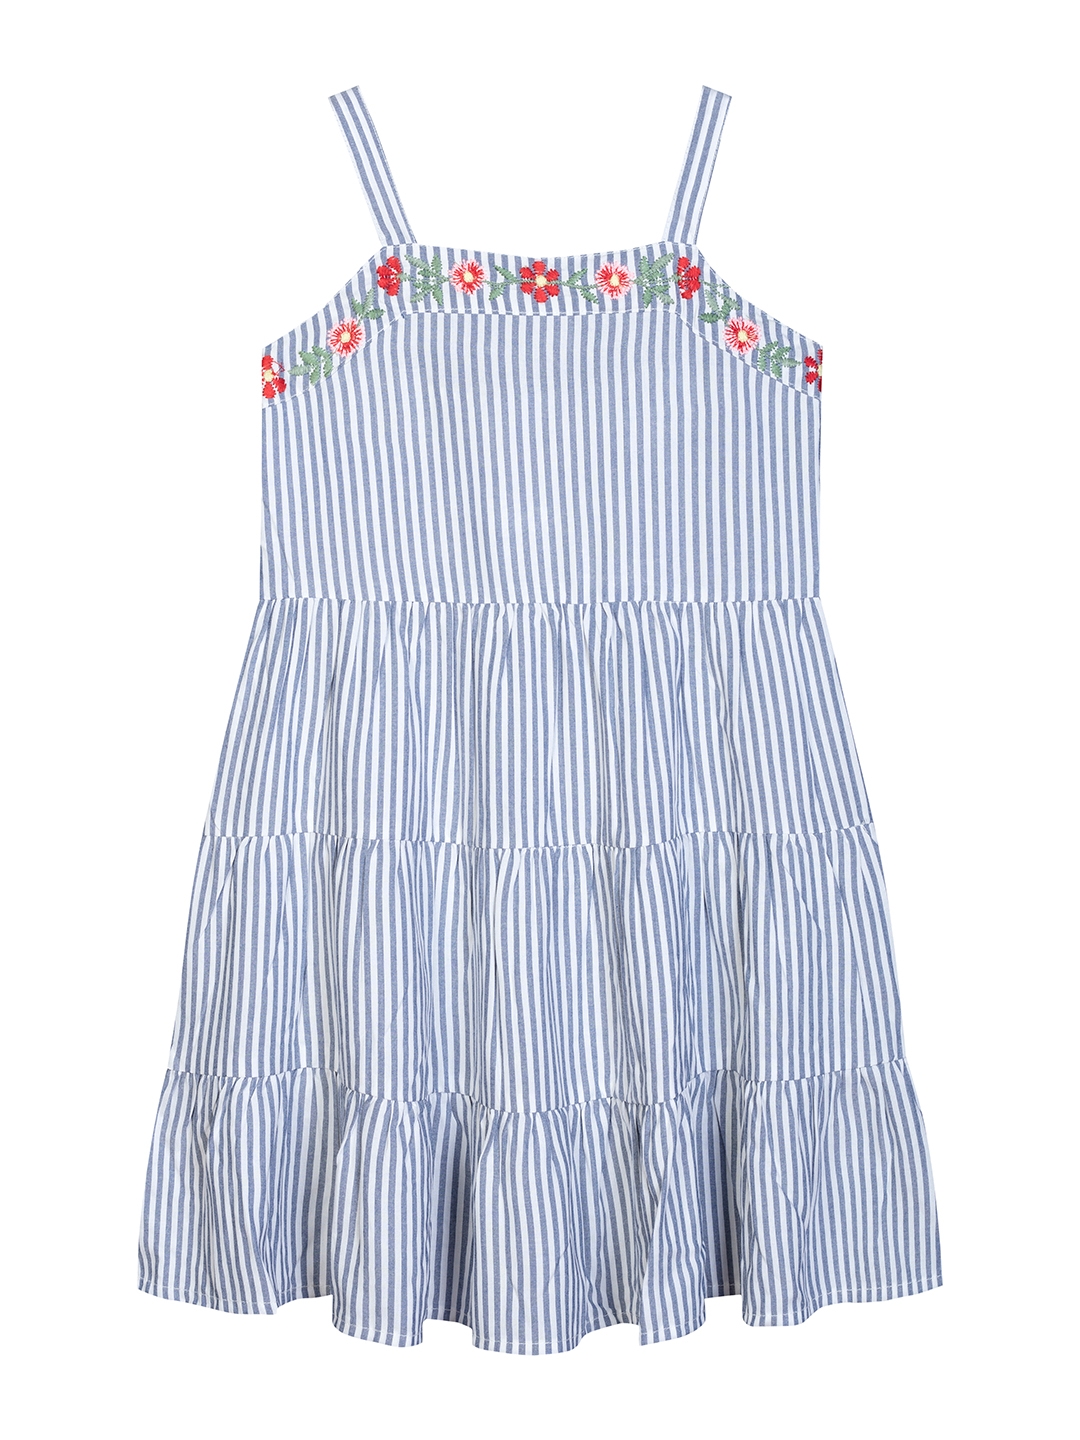 Budding Bees | Budding Bees Girls Blue Striped Embroidered A-Line Dress